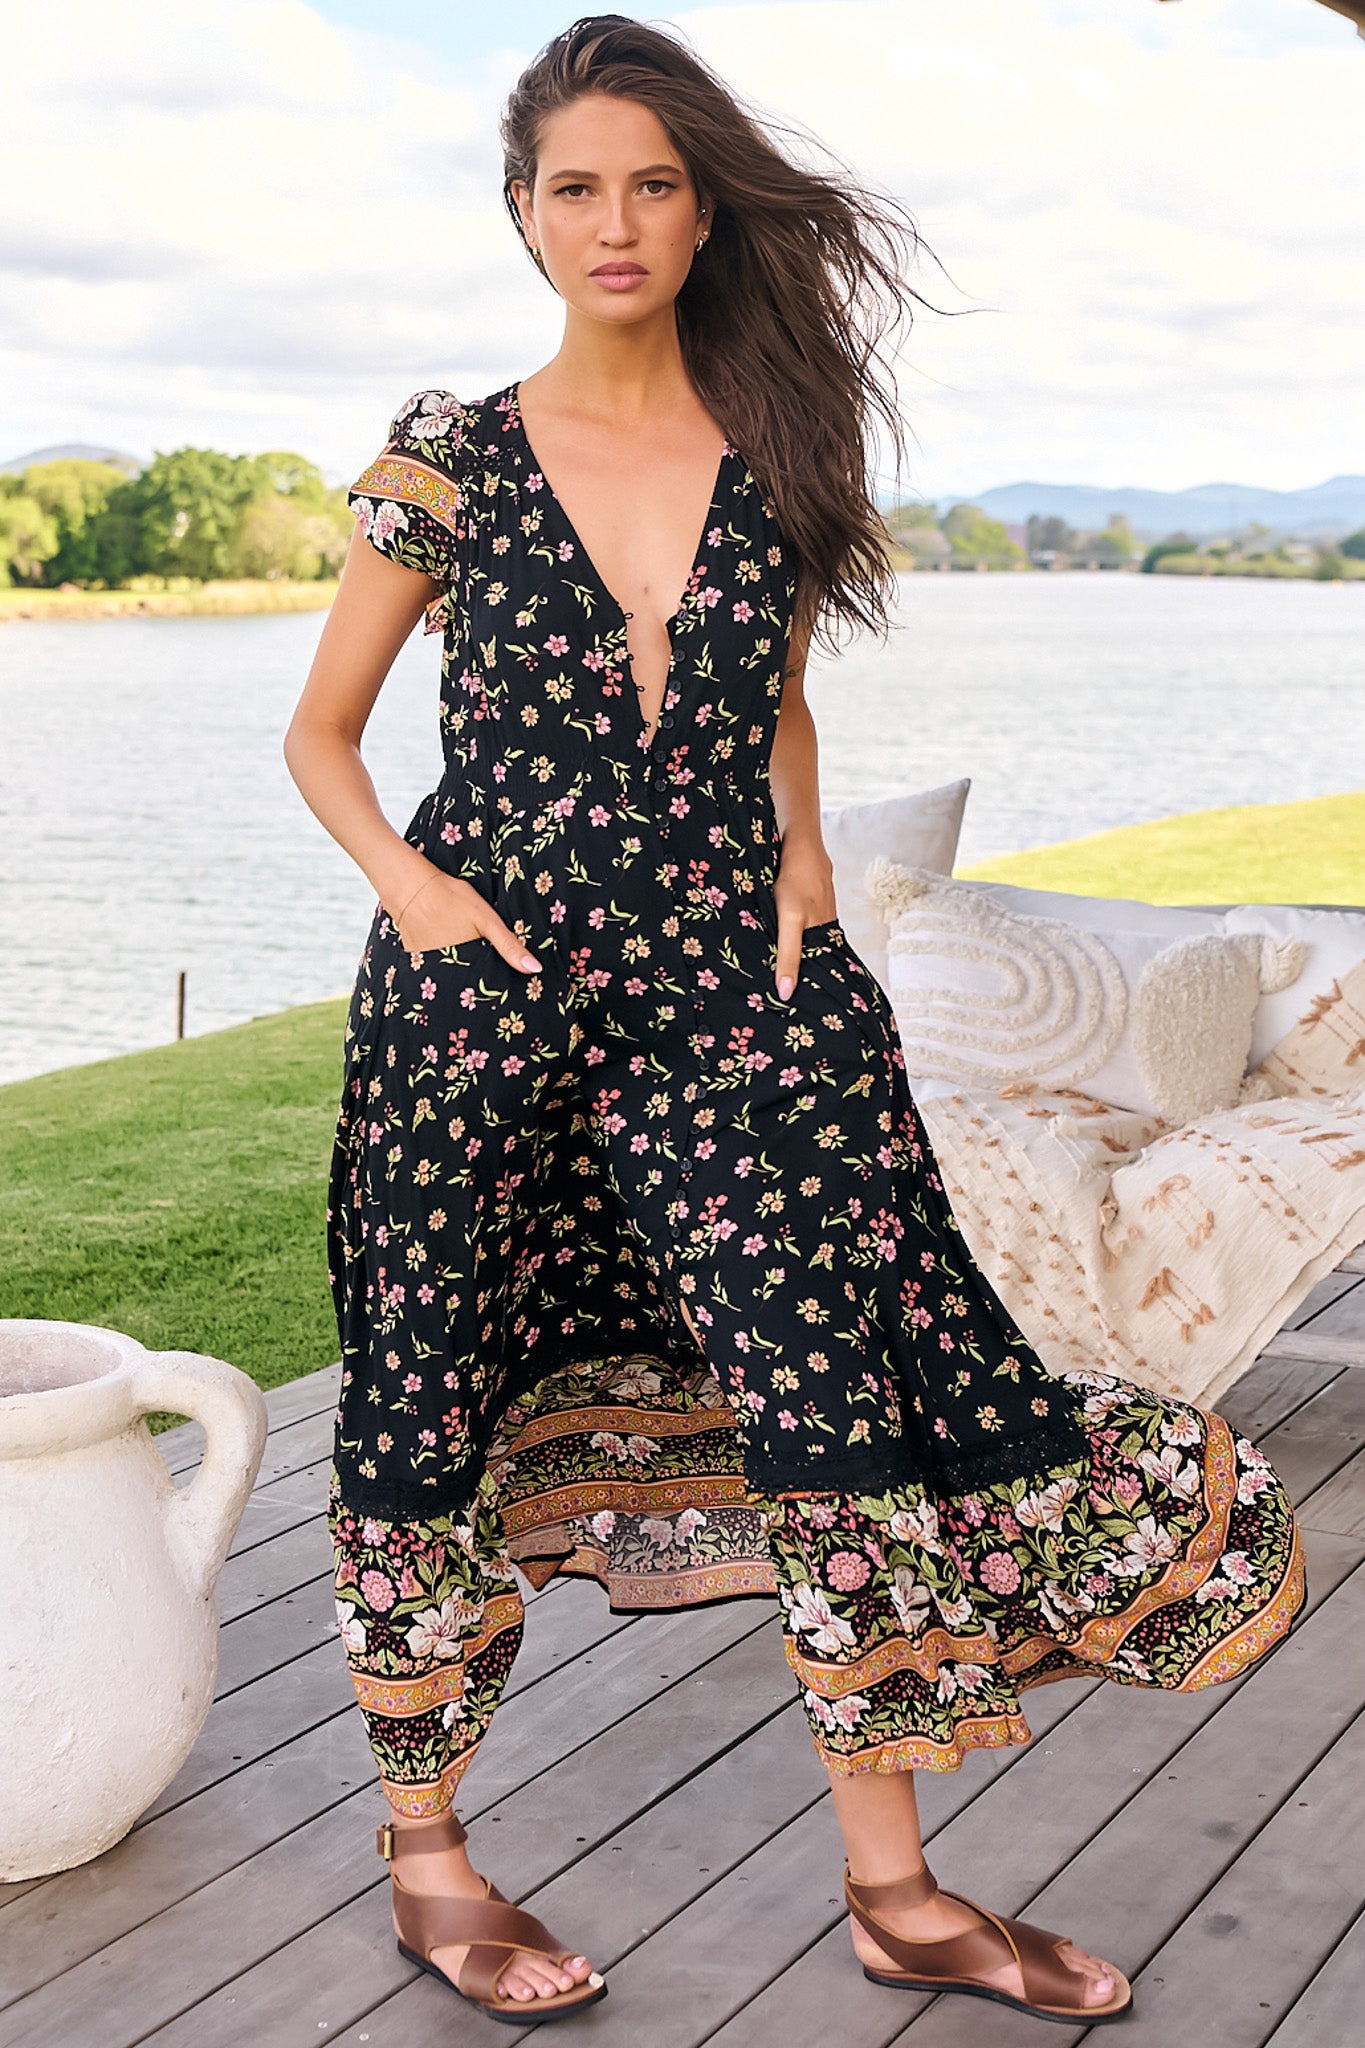 JAASE - Carmen Maxi Dress: Butterfly Cap Sleeve Button Down A Line Dress with Lace Trim in Eternity Print